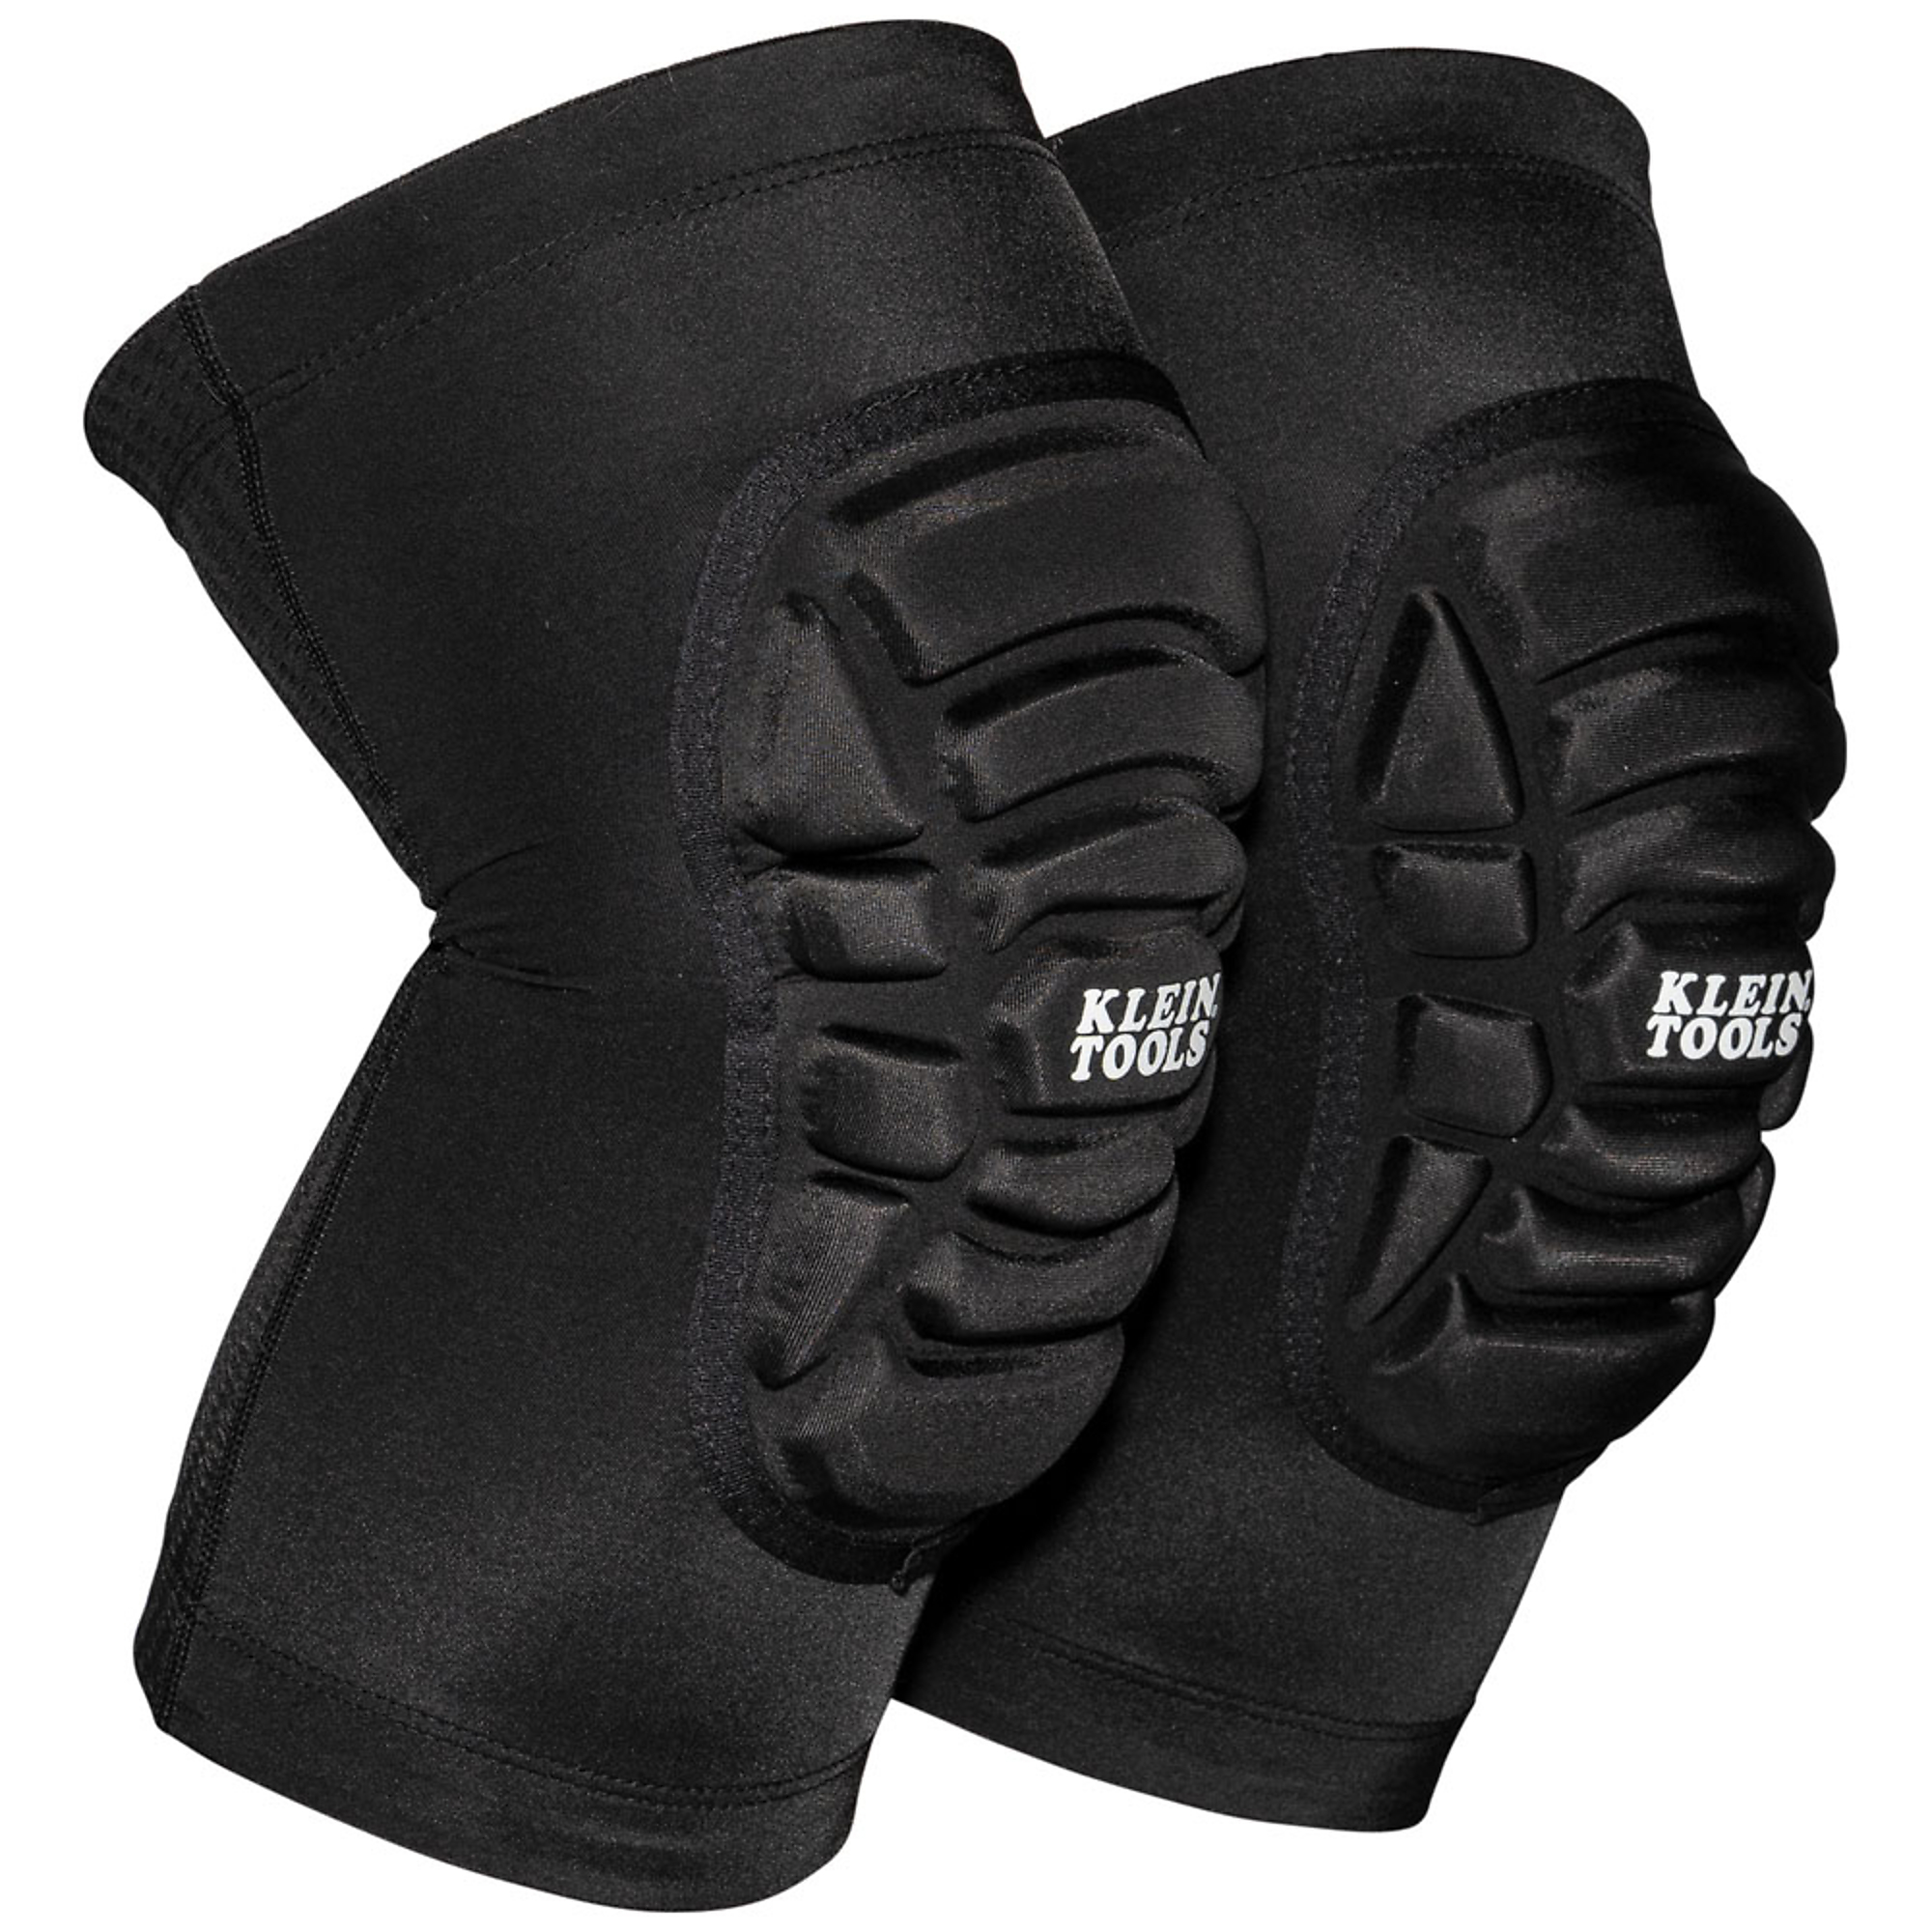 Klein Tools, Lightweight Knee Pad Sleeves, M/L, Included (qty.) 2 Color Black, Model 60492